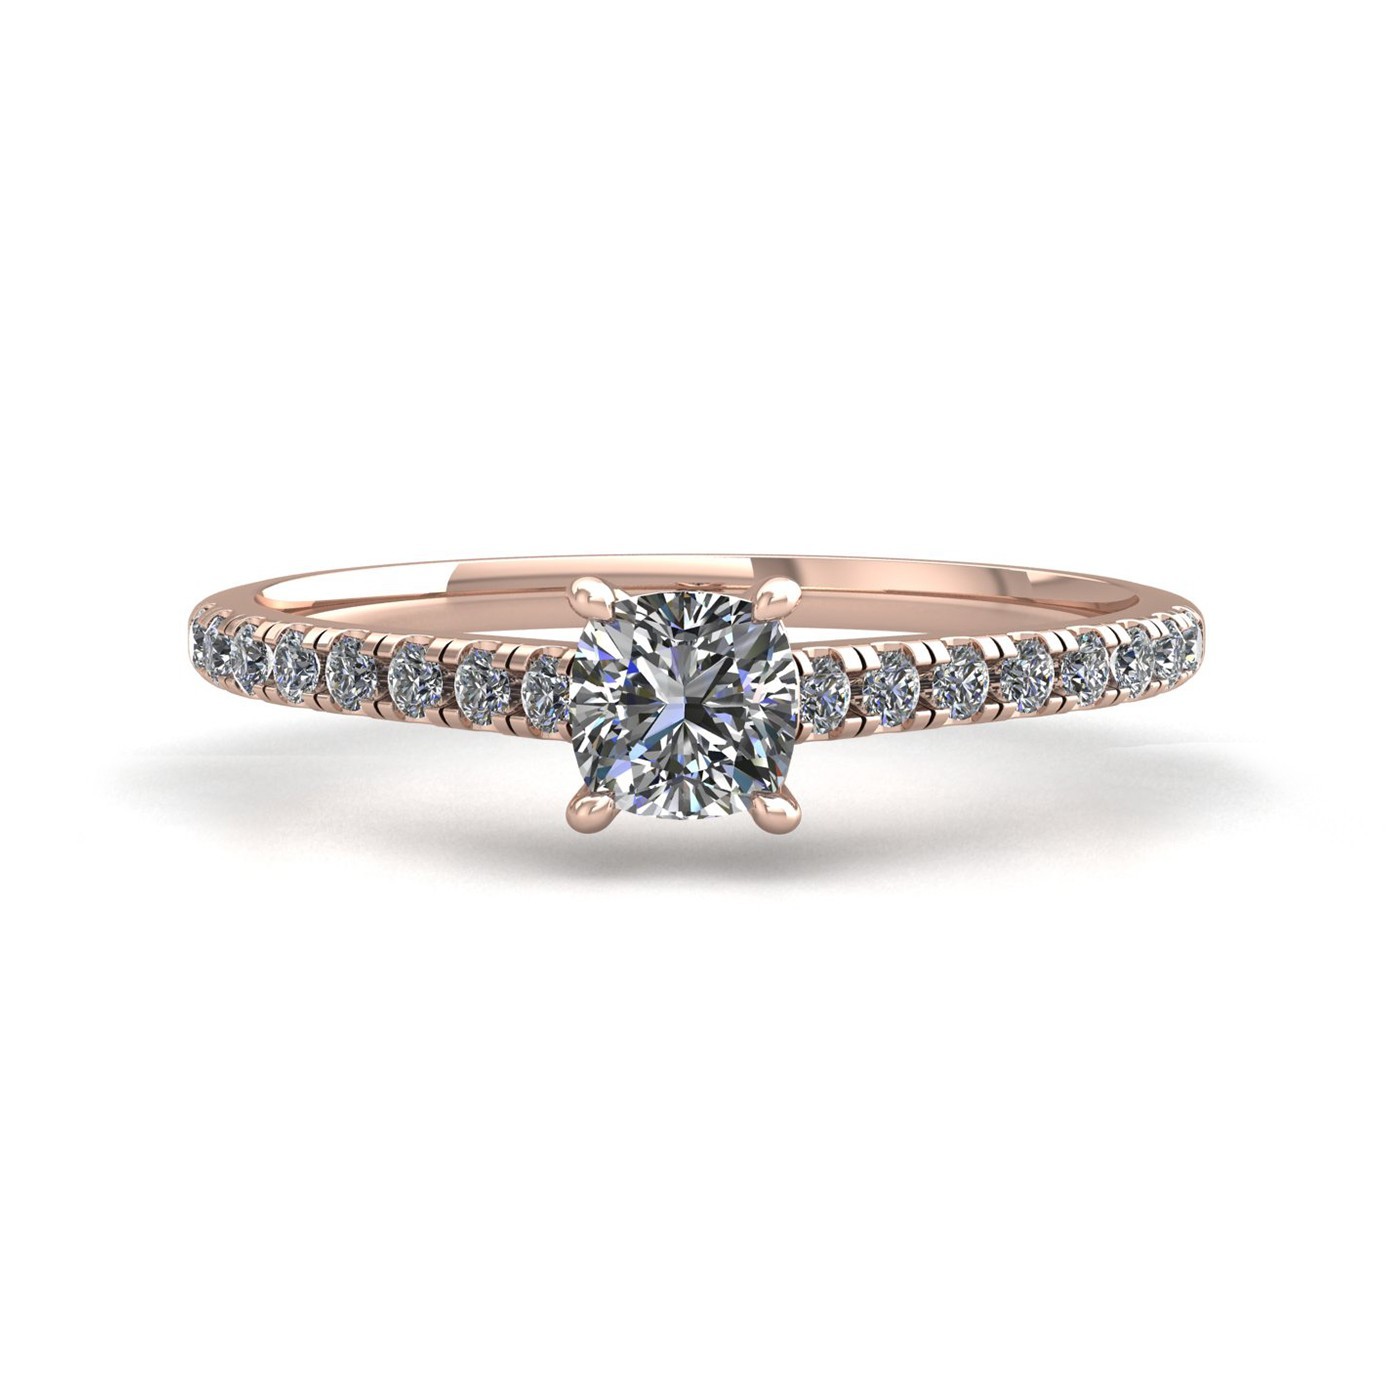 18k rose gold 1.5ct 4 prongs cushion cut diamond engagement ring with whisper thin pavÉ set band Photos & images